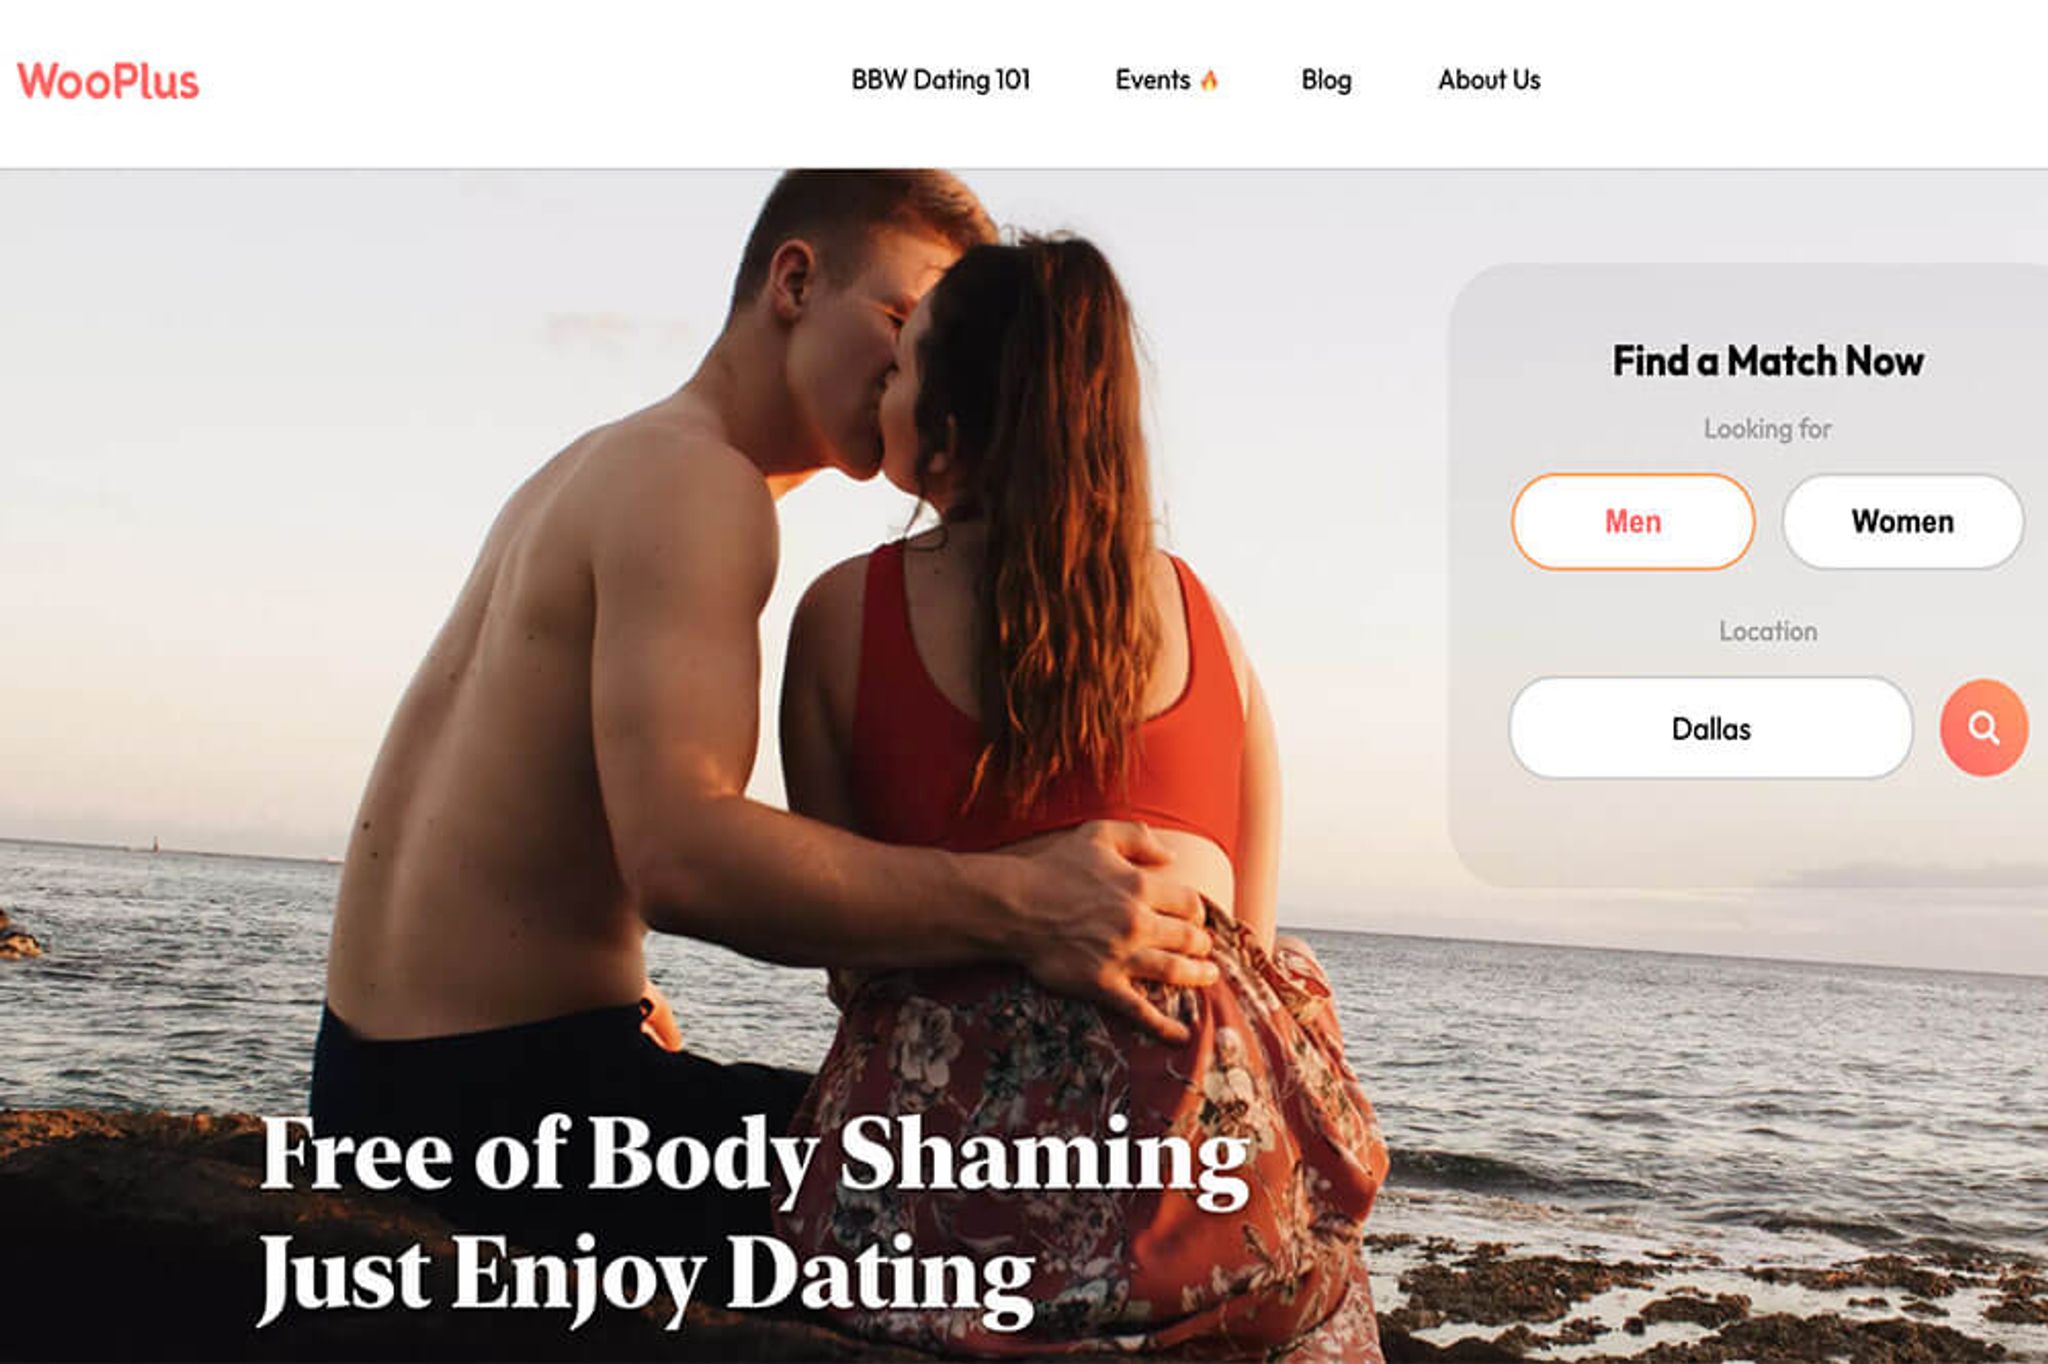 the wooplus bbw dating site